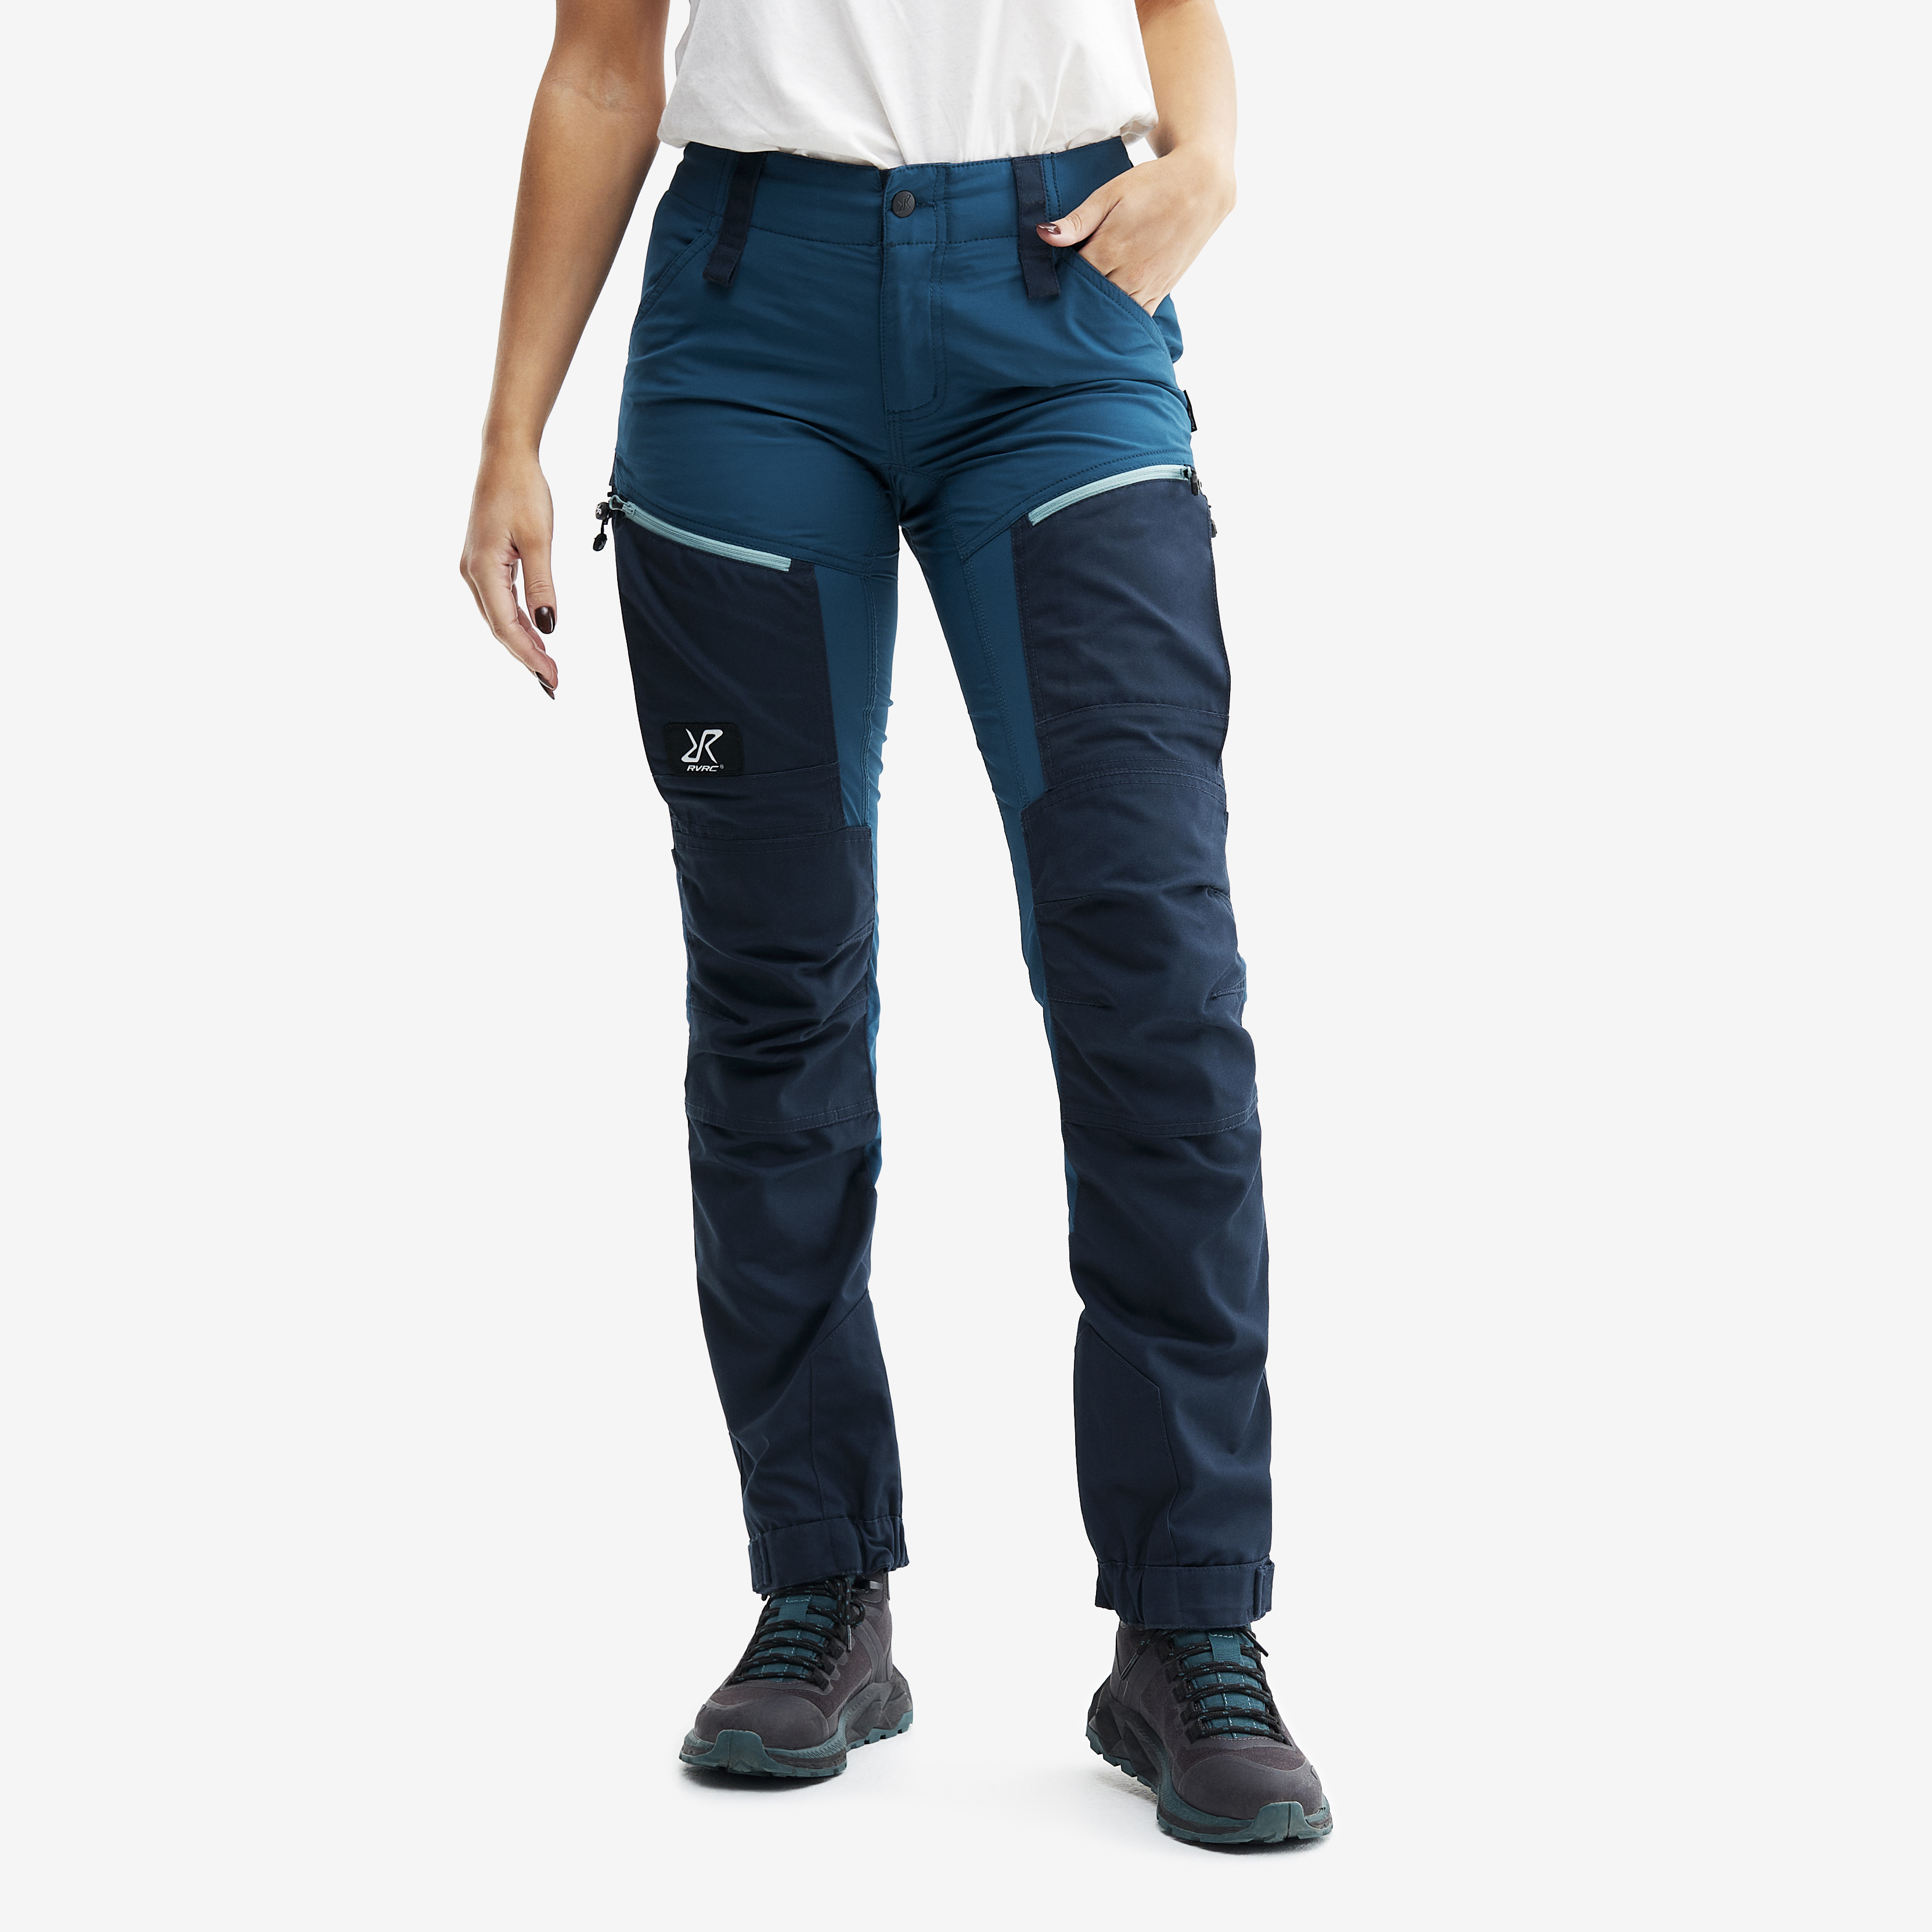 RVRC GP Pro hiking trousers for women in blue